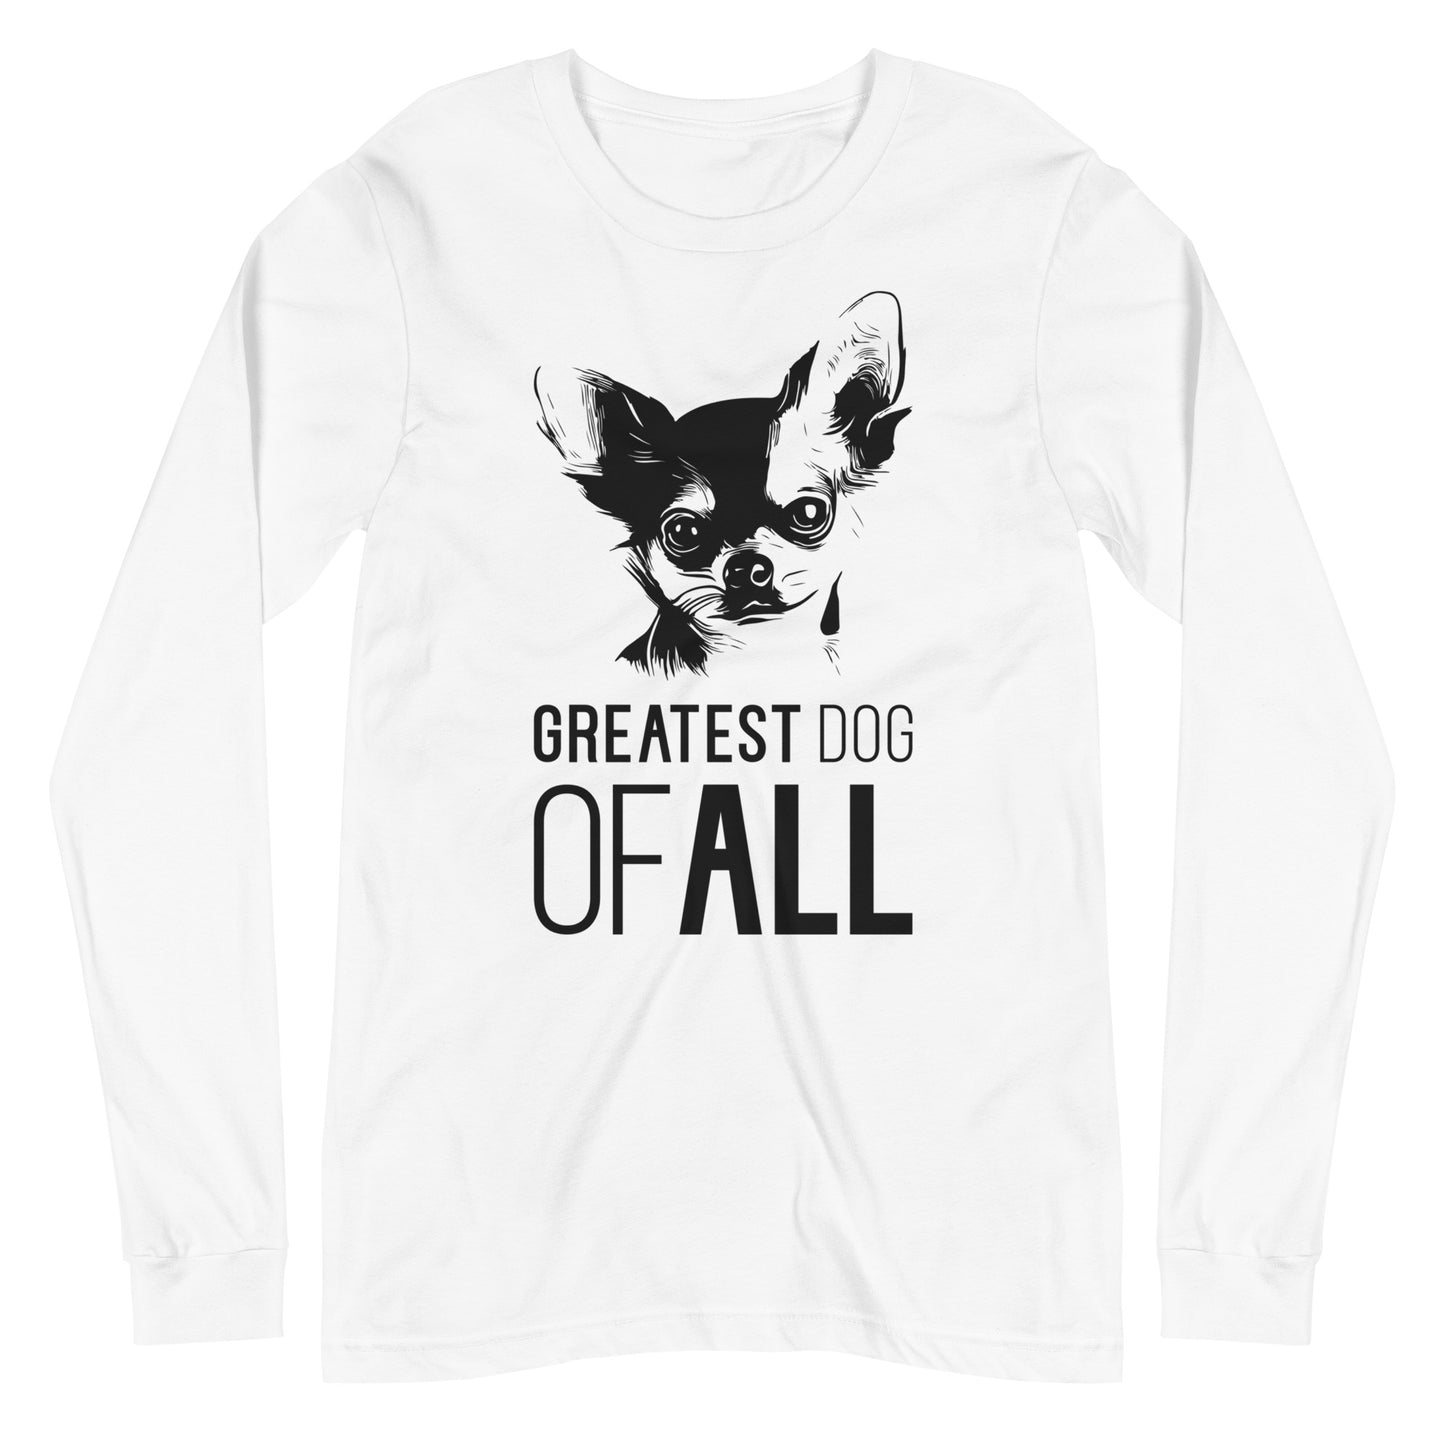 Black Chihuahua face silhouette with Greatest Dog of All caption on unisex white long sleeve t-shirt